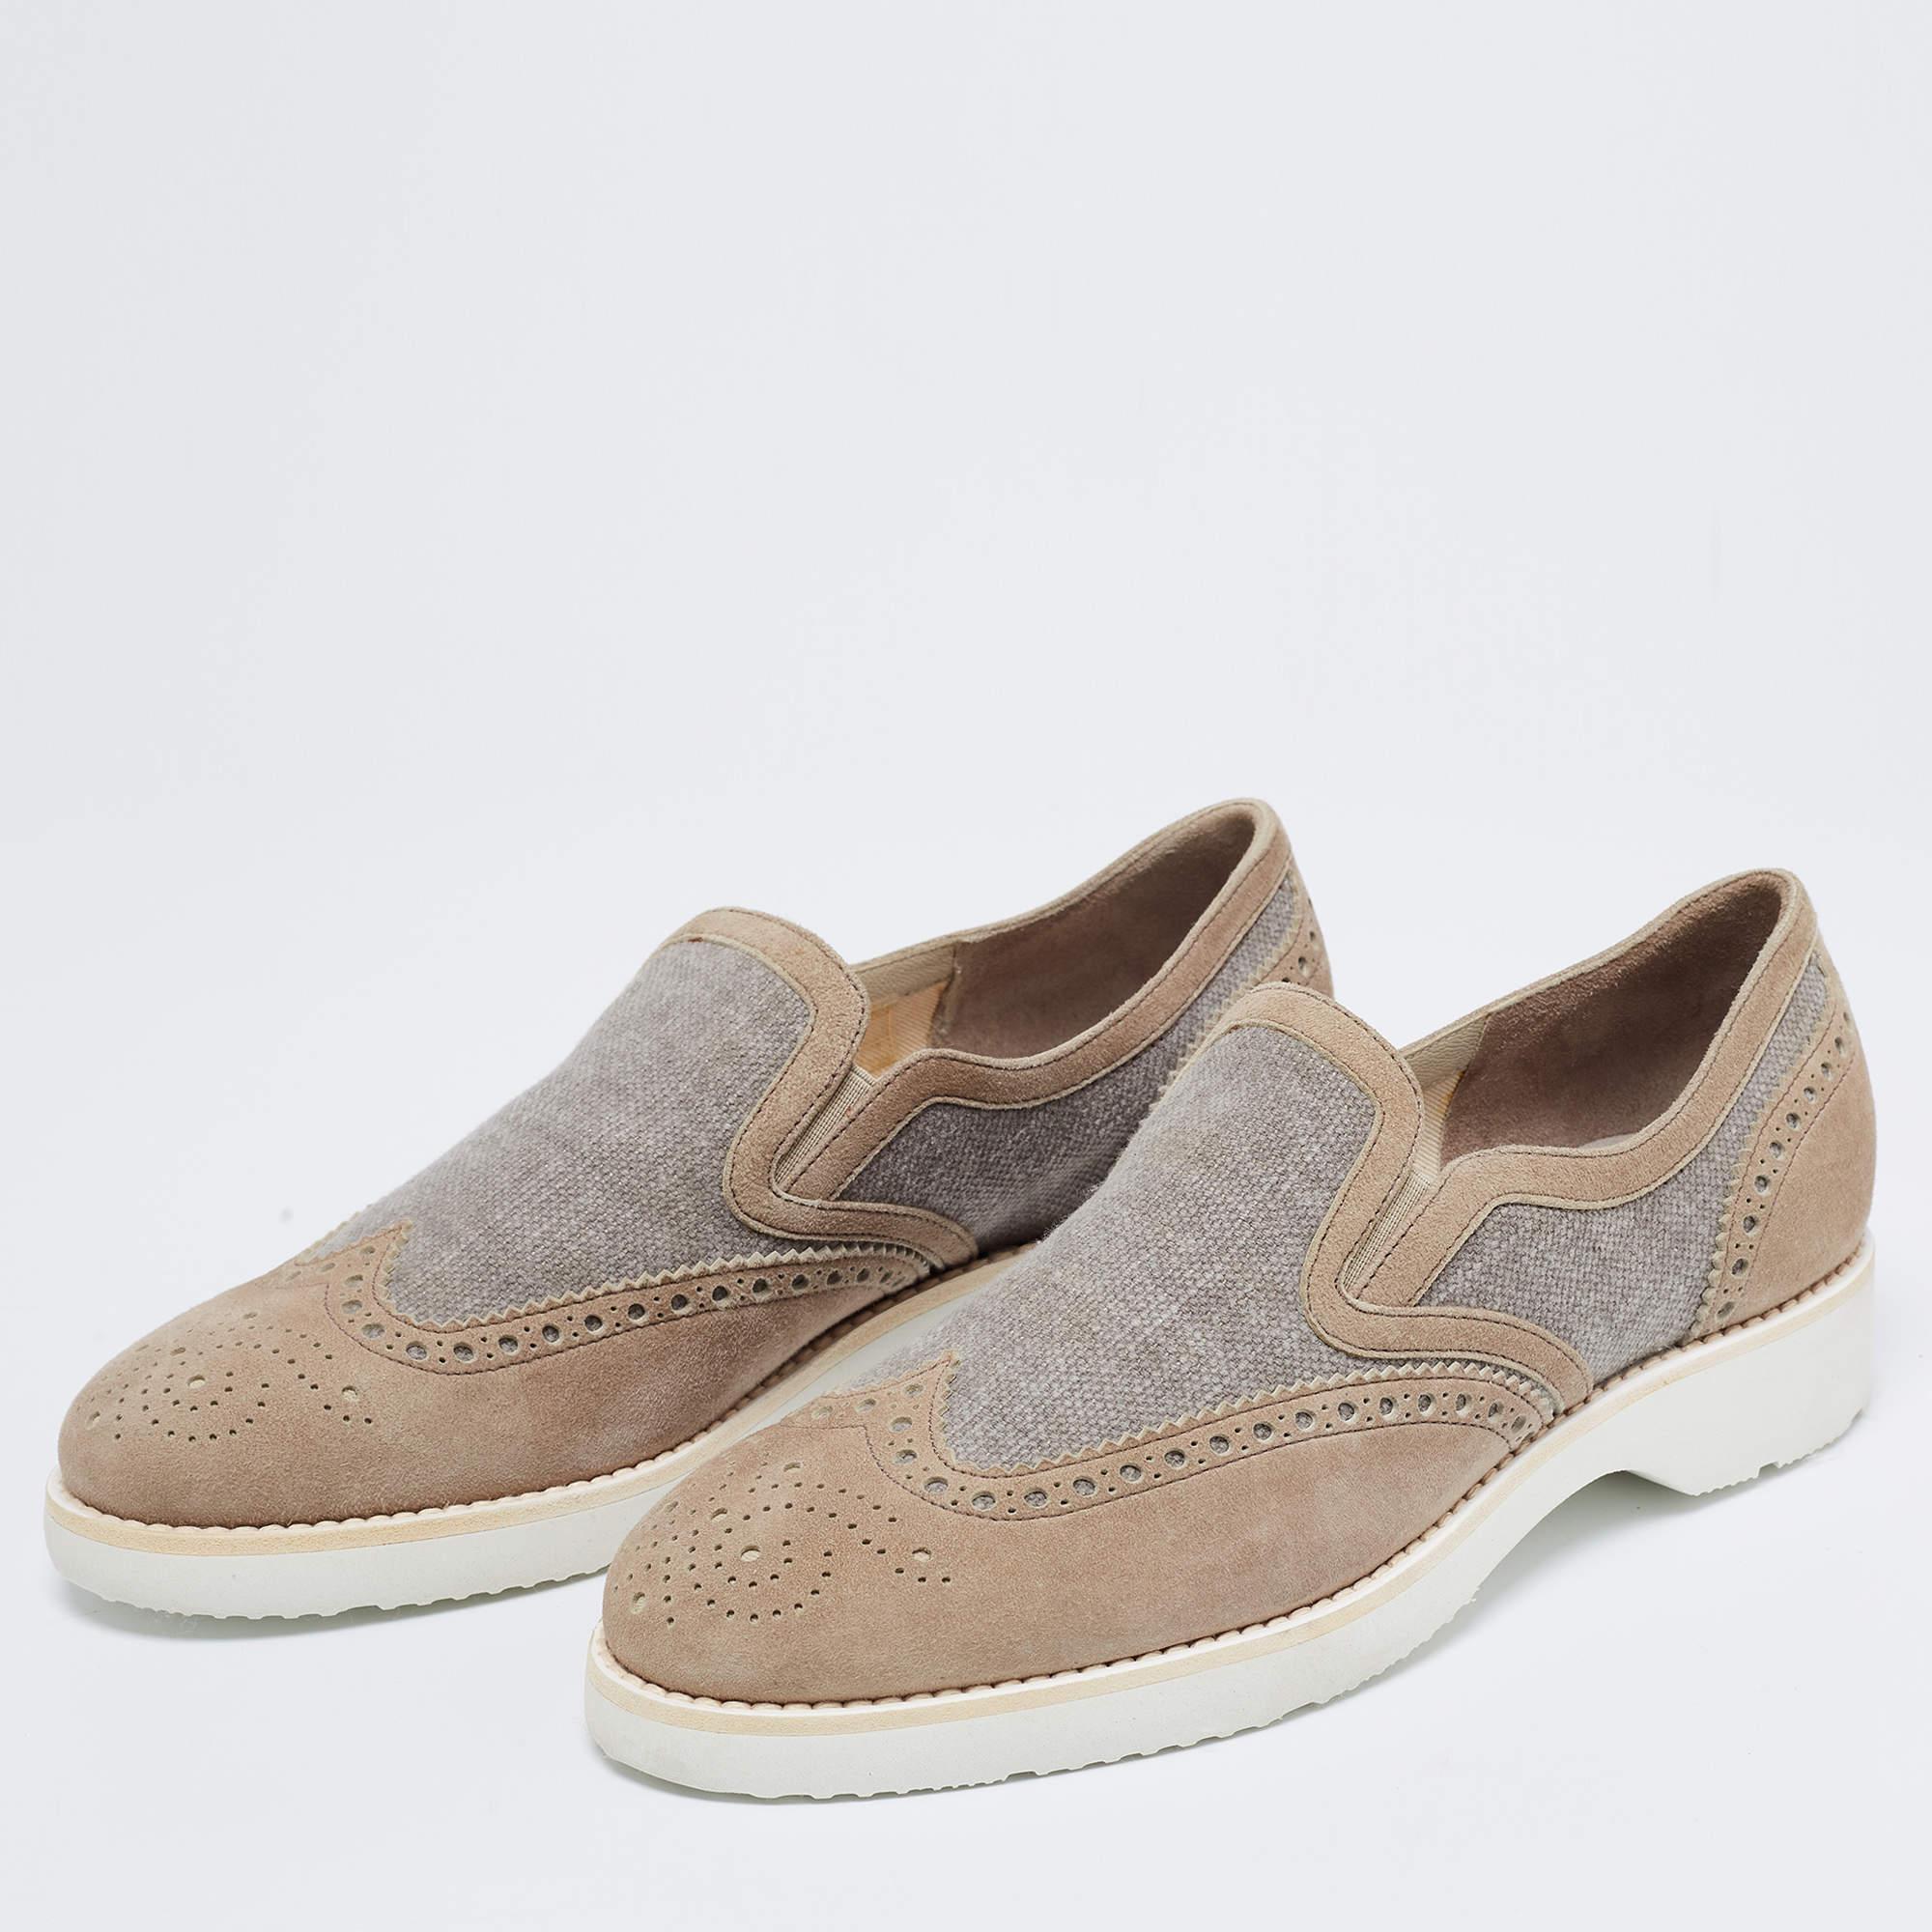 Beautifully crafted using suede and canvas, these Santoni slip-on sneakers are sure to keep you comfortably stylish. Featuring elastic panels, brogue details, and flexible rubber soles, these shoes will be a great addition to your closet.

